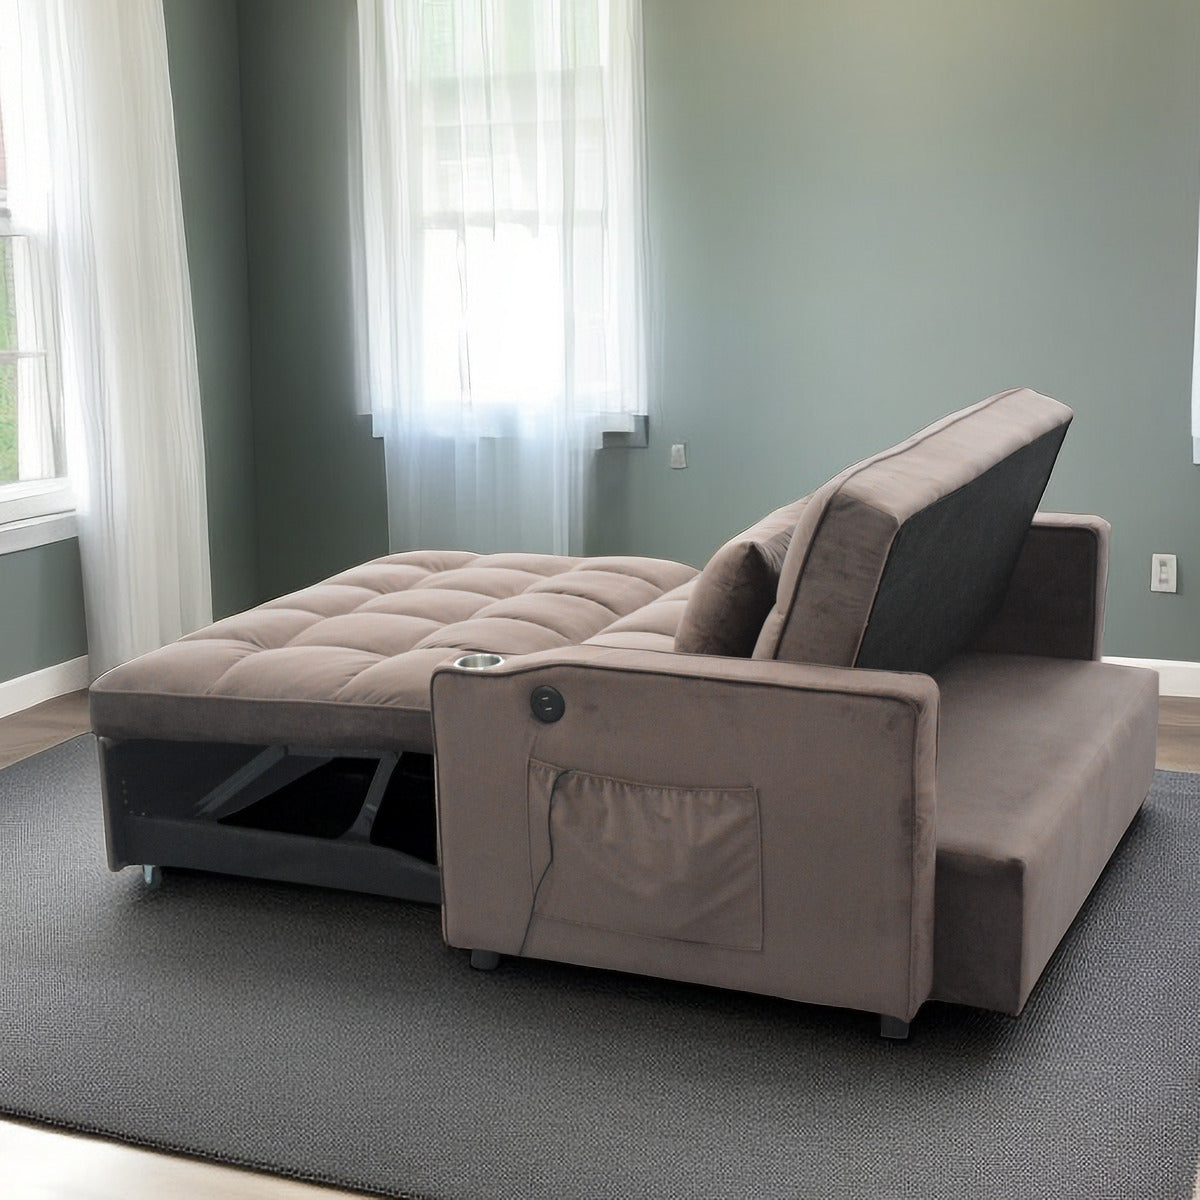 Lazy Sofa Bed,Luxury Seating Foldable Sofa Bed,